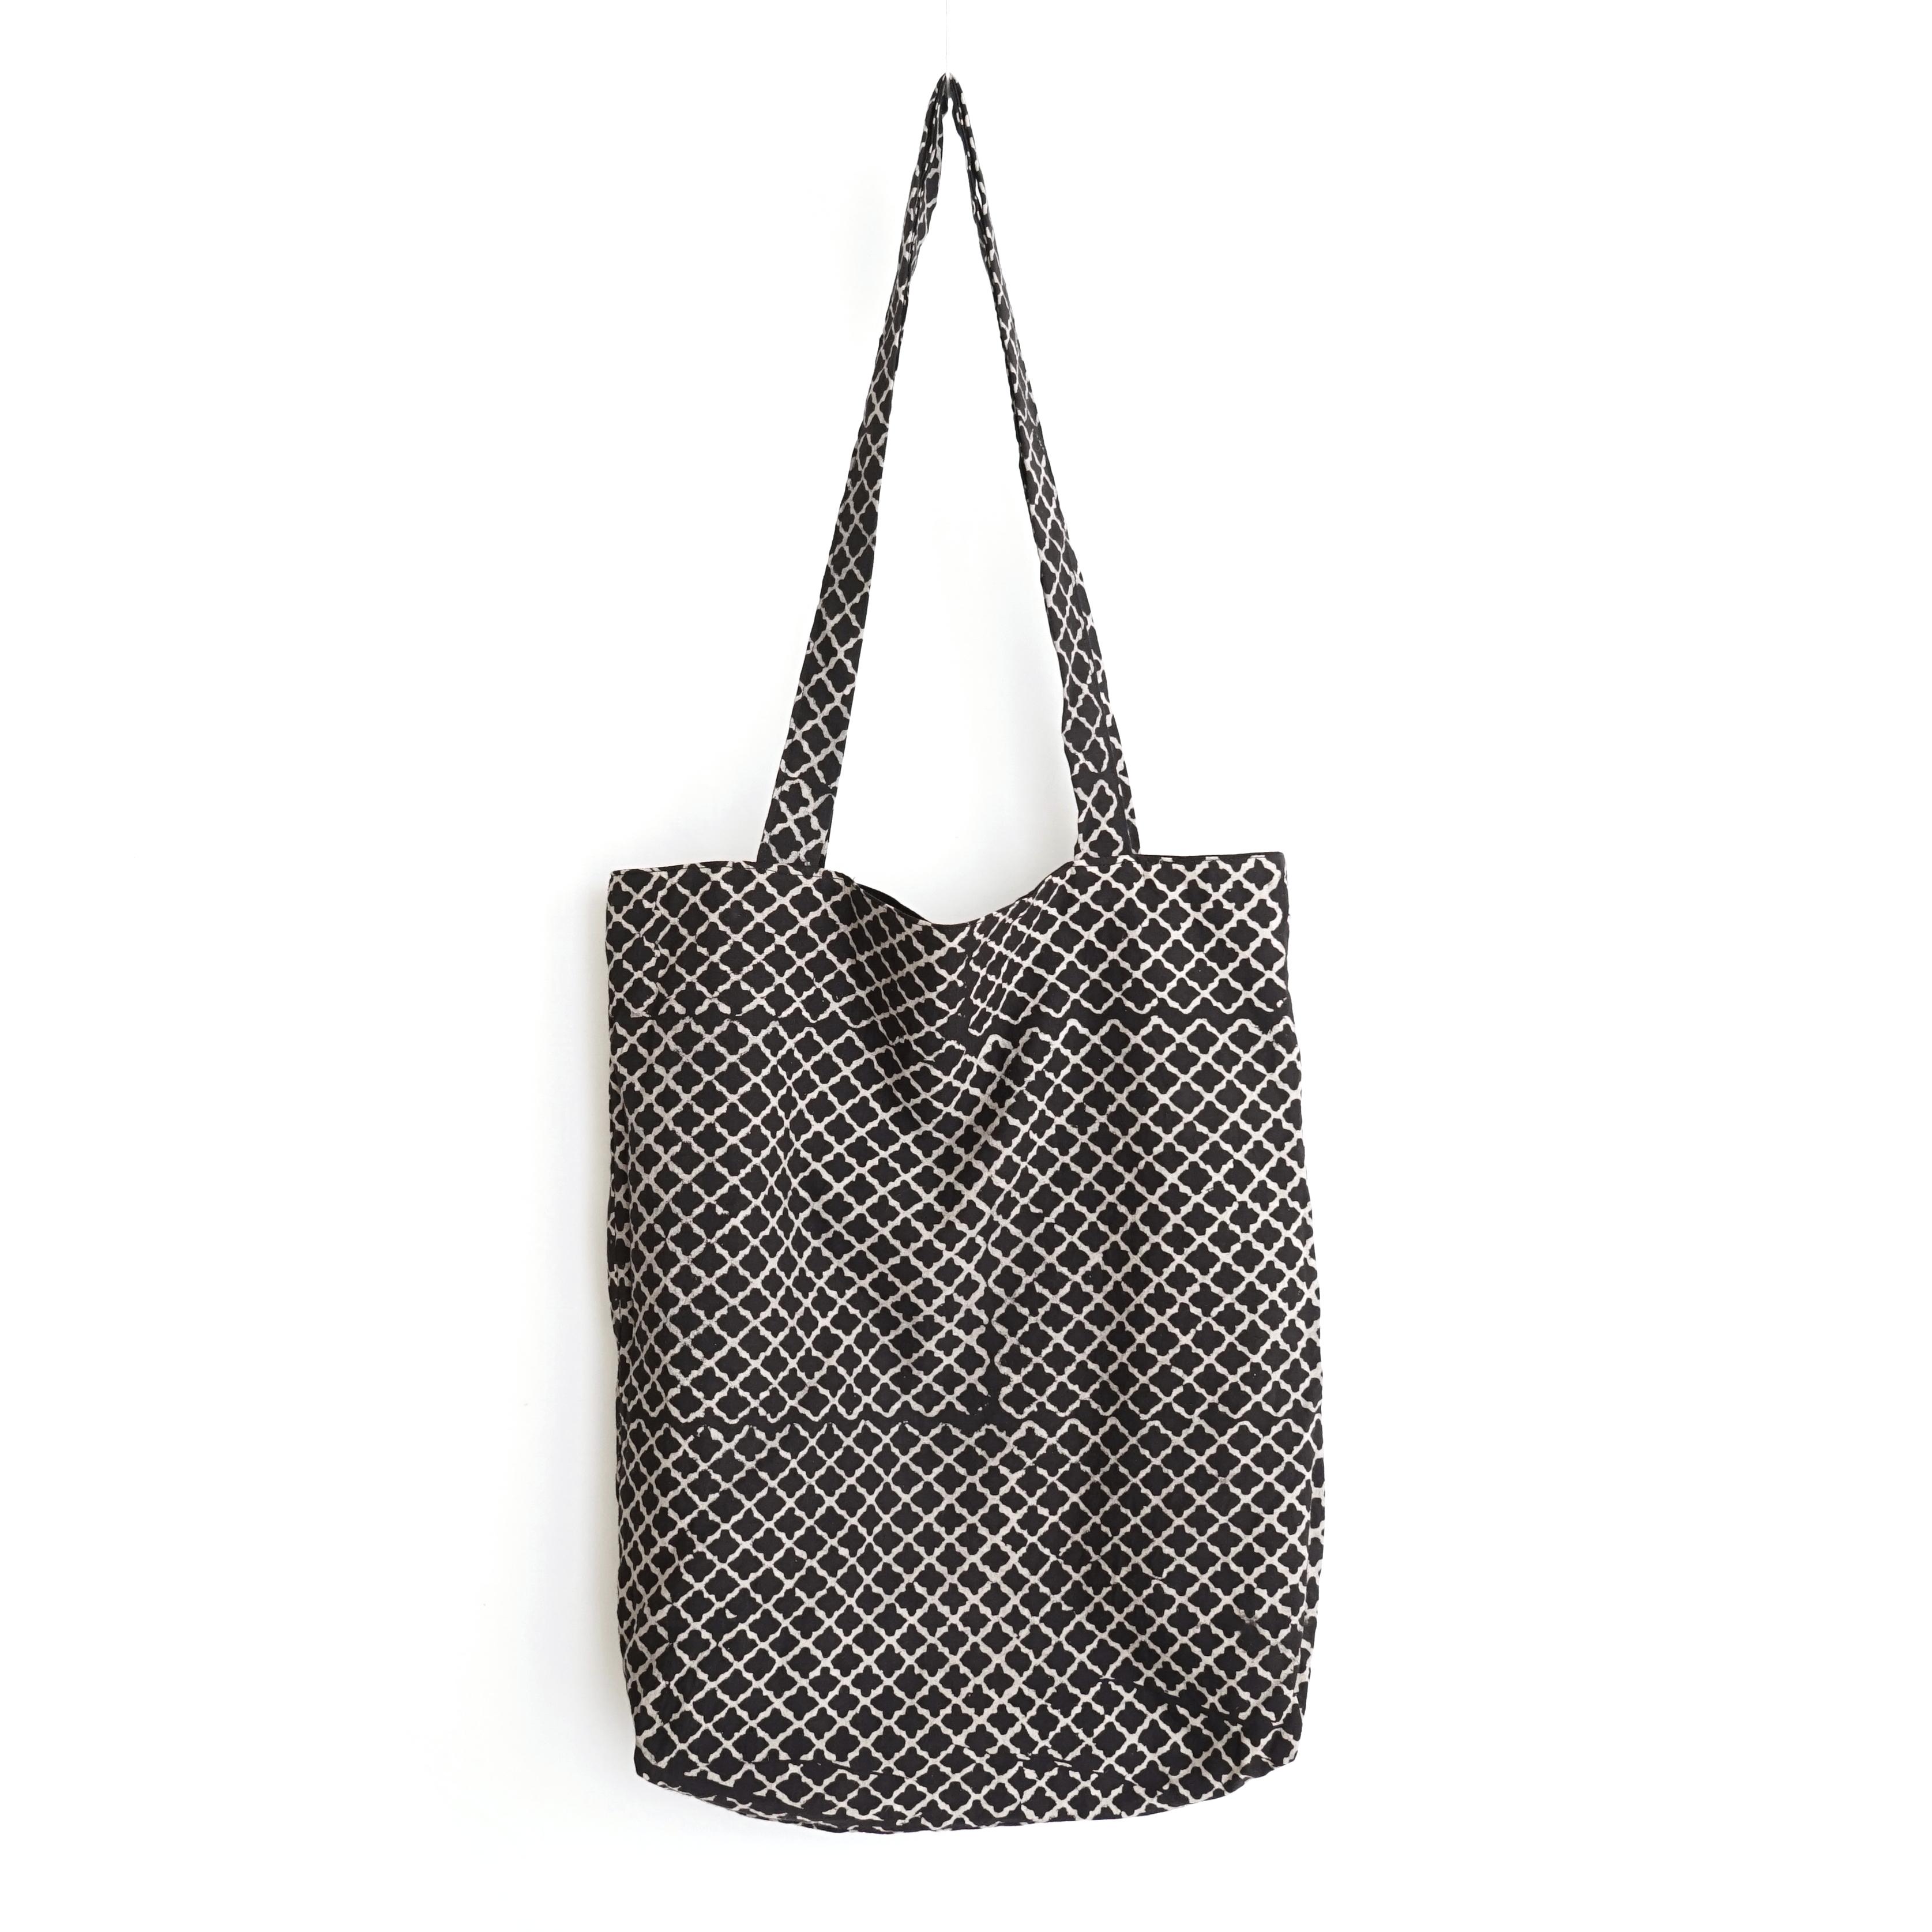 block printed cotton tote bag, natural dye, black, beige clover, lined with black cotton, closed